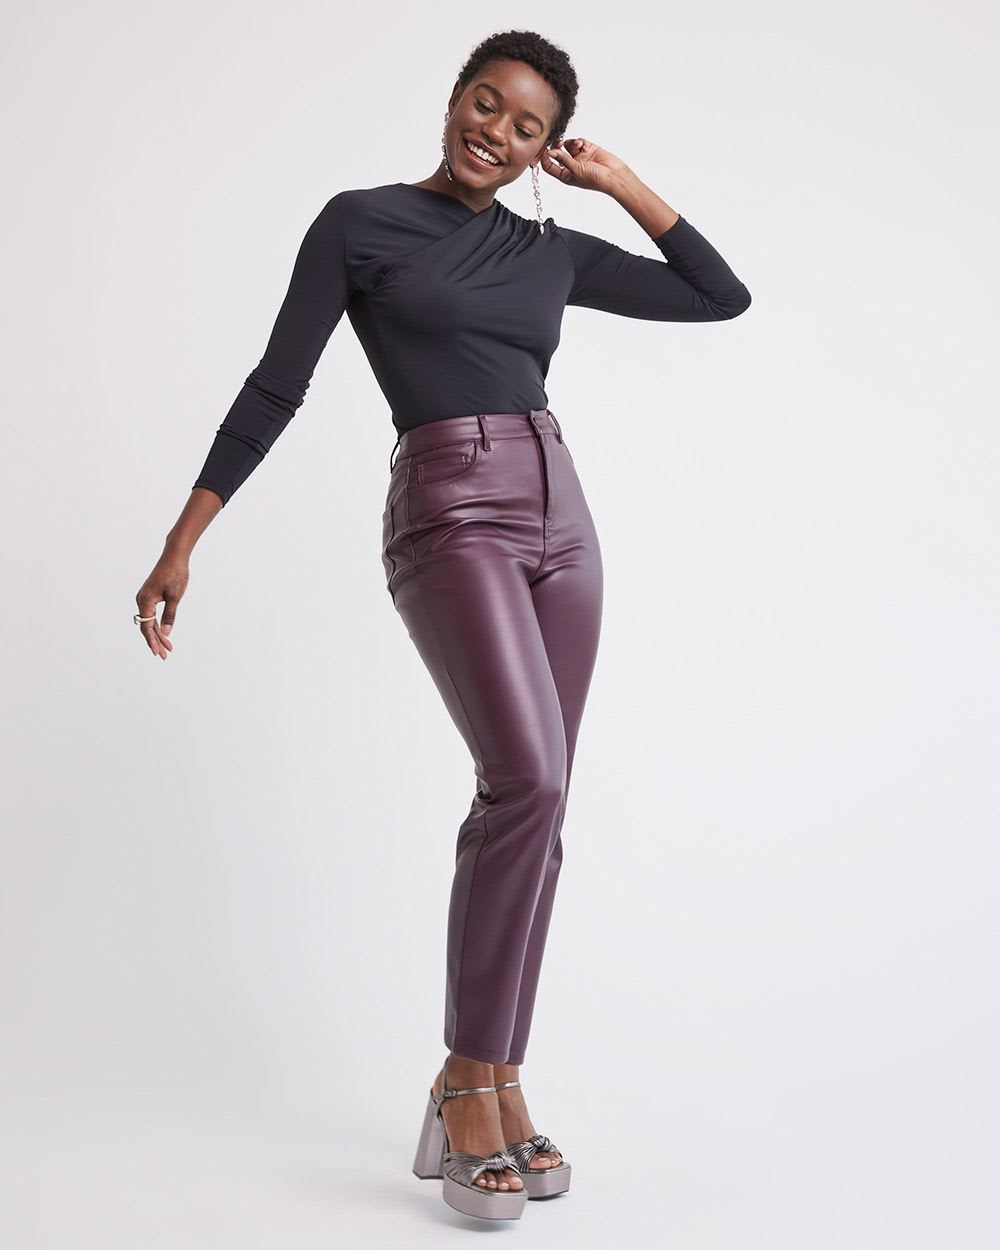 Straight-Leg High-Rise Faux Leather Pant